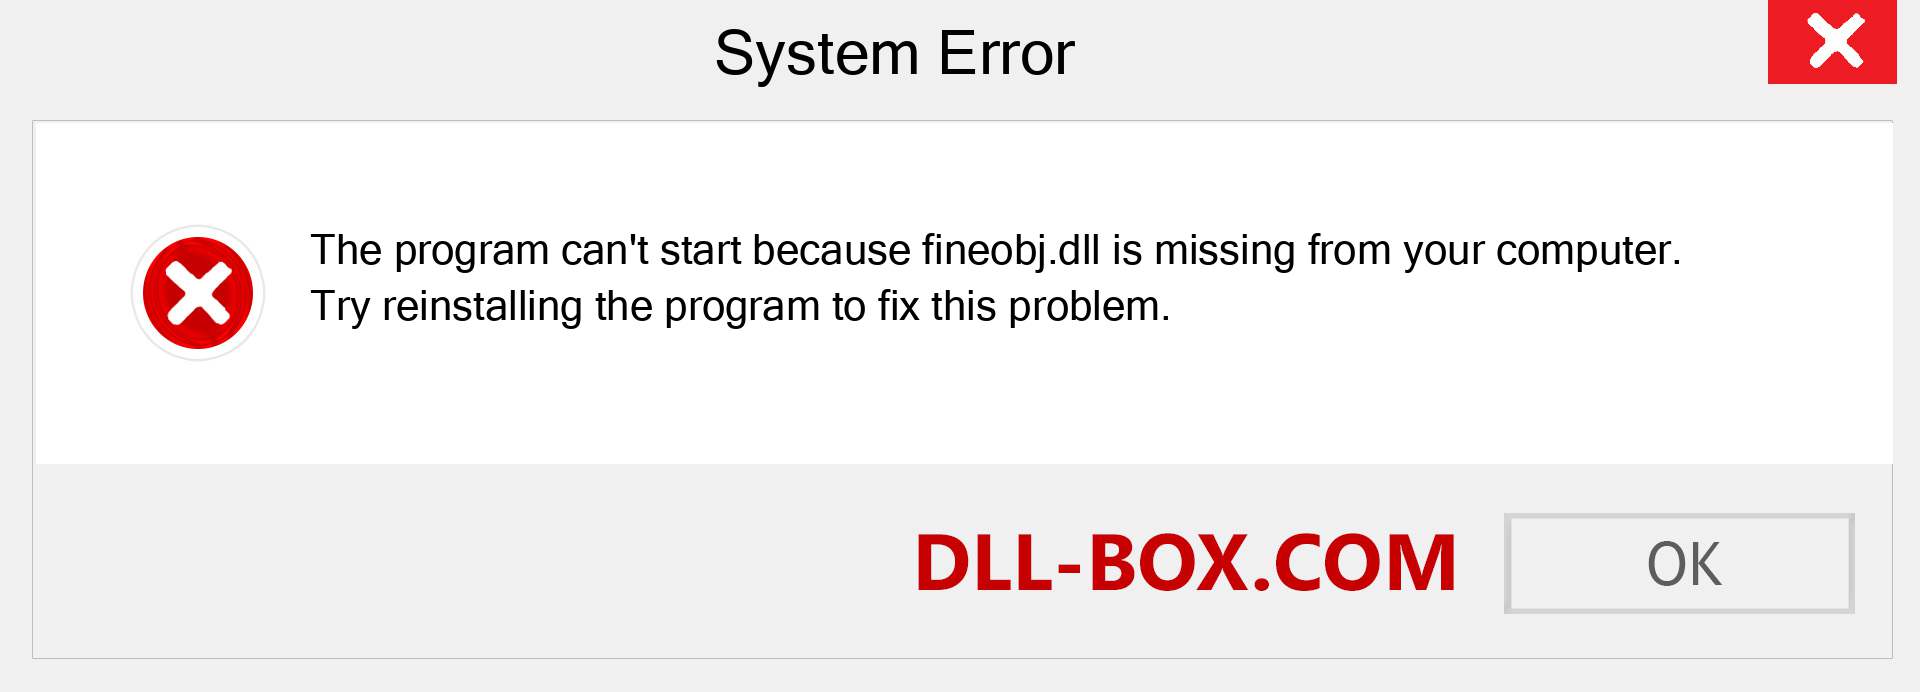  fineobj.dll file is missing?. Download for Windows 7, 8, 10 - Fix  fineobj dll Missing Error on Windows, photos, images